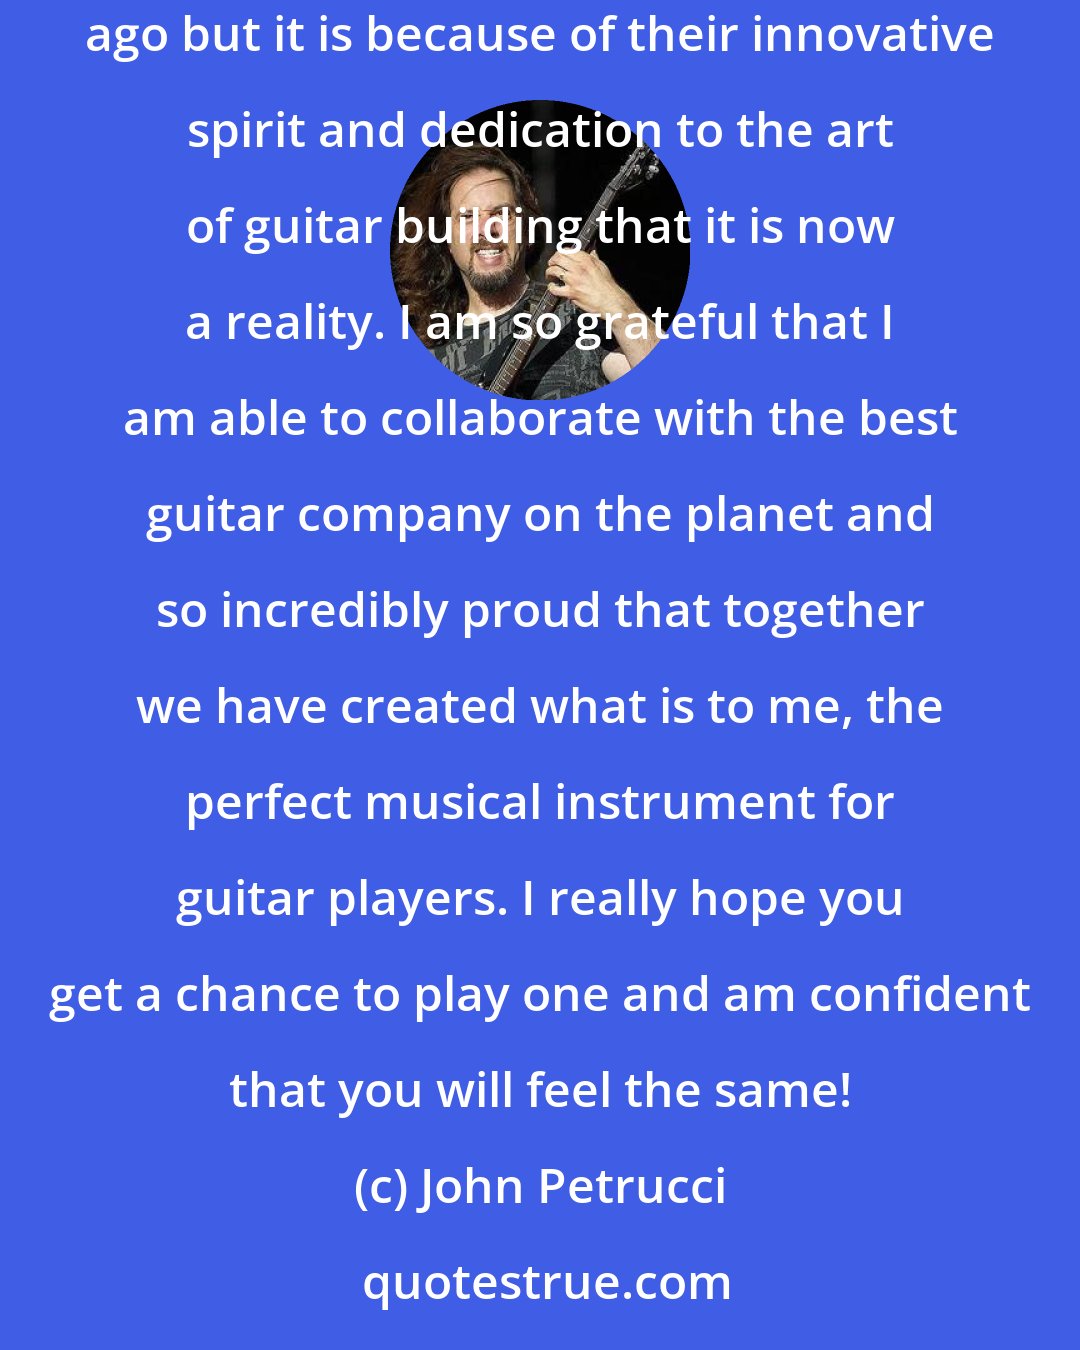 John Petrucci: The Majesty guitar symbolizes the very reason why I am so proud to be a Music Man artist. I had the idea for this guitar a couple of years ago but it is because of their innovative spirit and dedication to the art of guitar building that it is now a reality. I am so grateful that I am able to collaborate with the best guitar company on the planet and so incredibly proud that together we have created what is to me, the perfect musical instrument for guitar players. I really hope you get a chance to play one and am confident that you will feel the same!